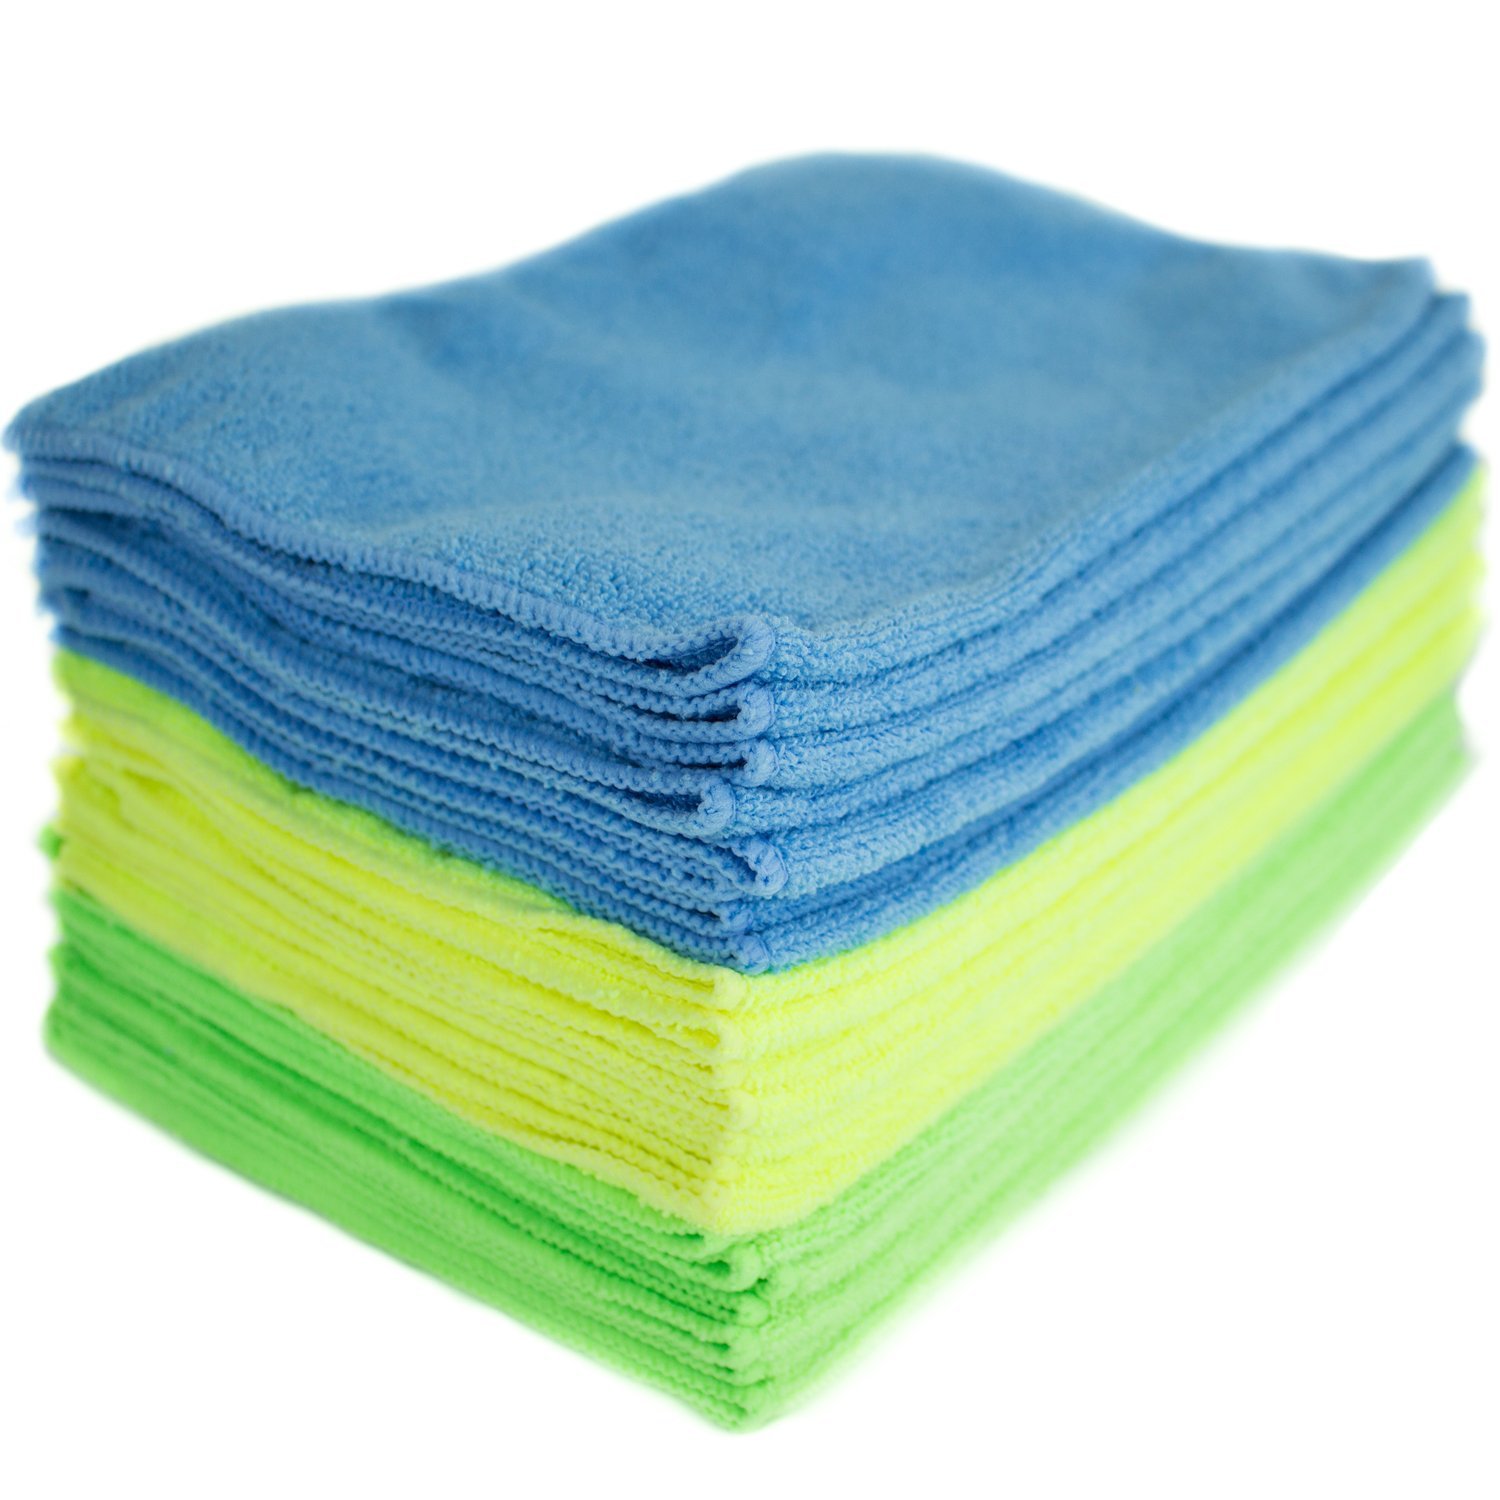 Top 10 Best Microfiber Cleaning Cloths 2015